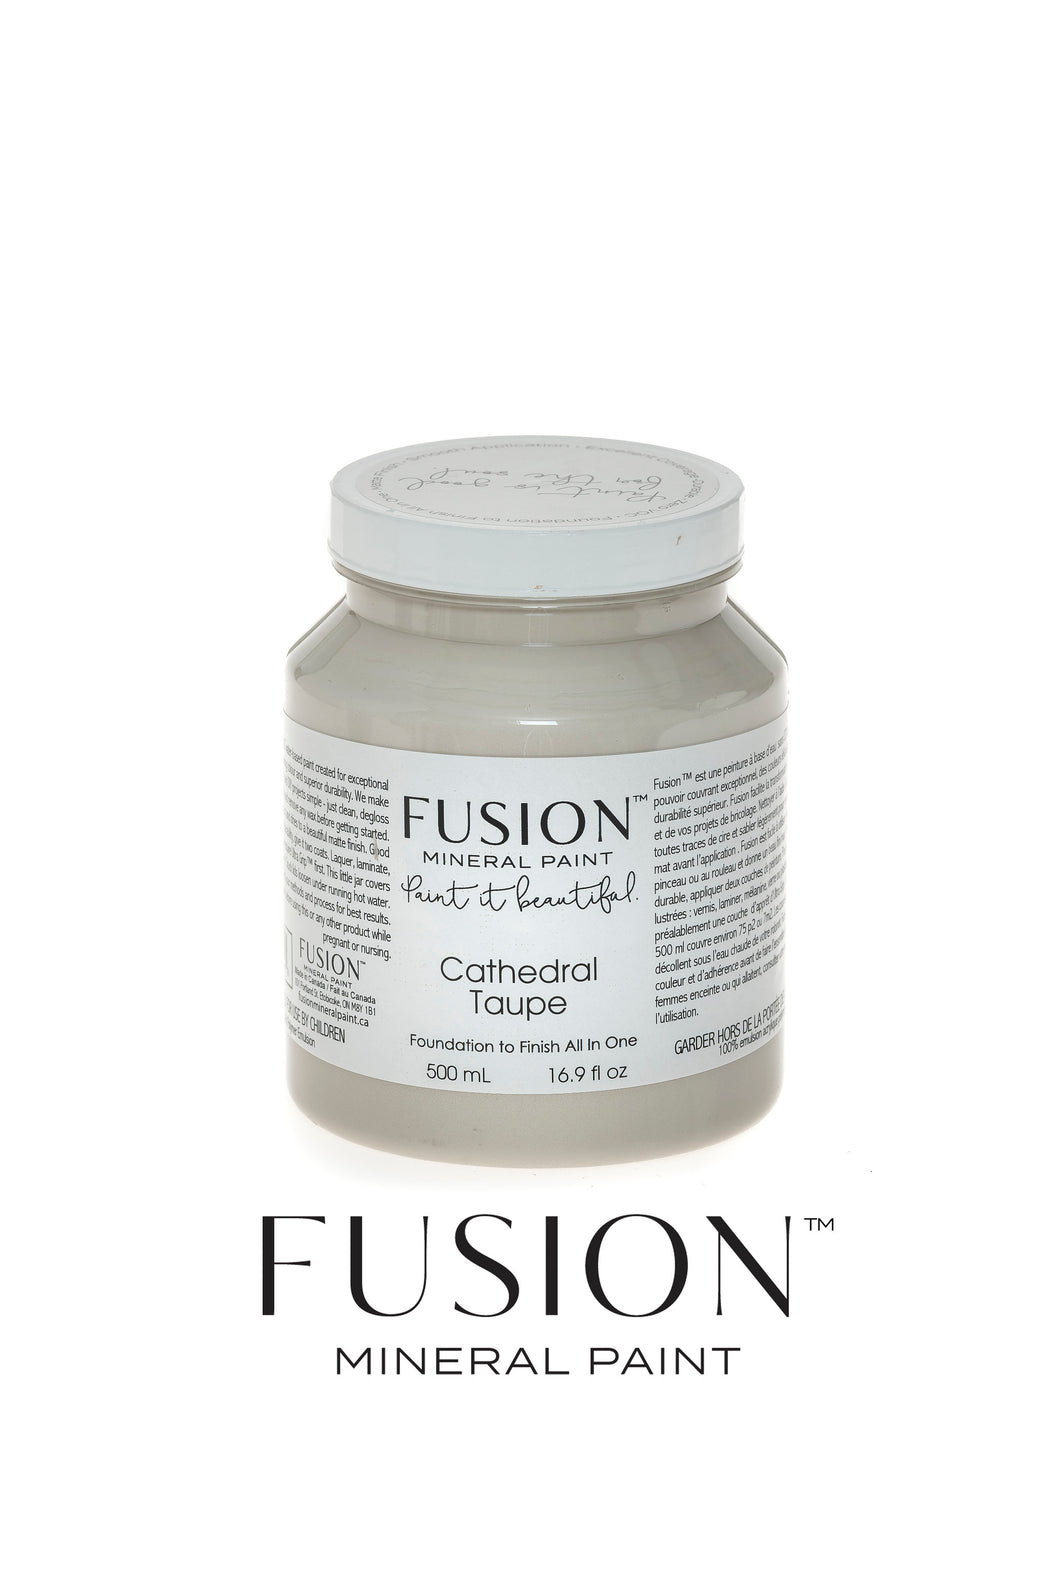 FUSION™ Mineral Paint - Cathedral Taupe 500ml